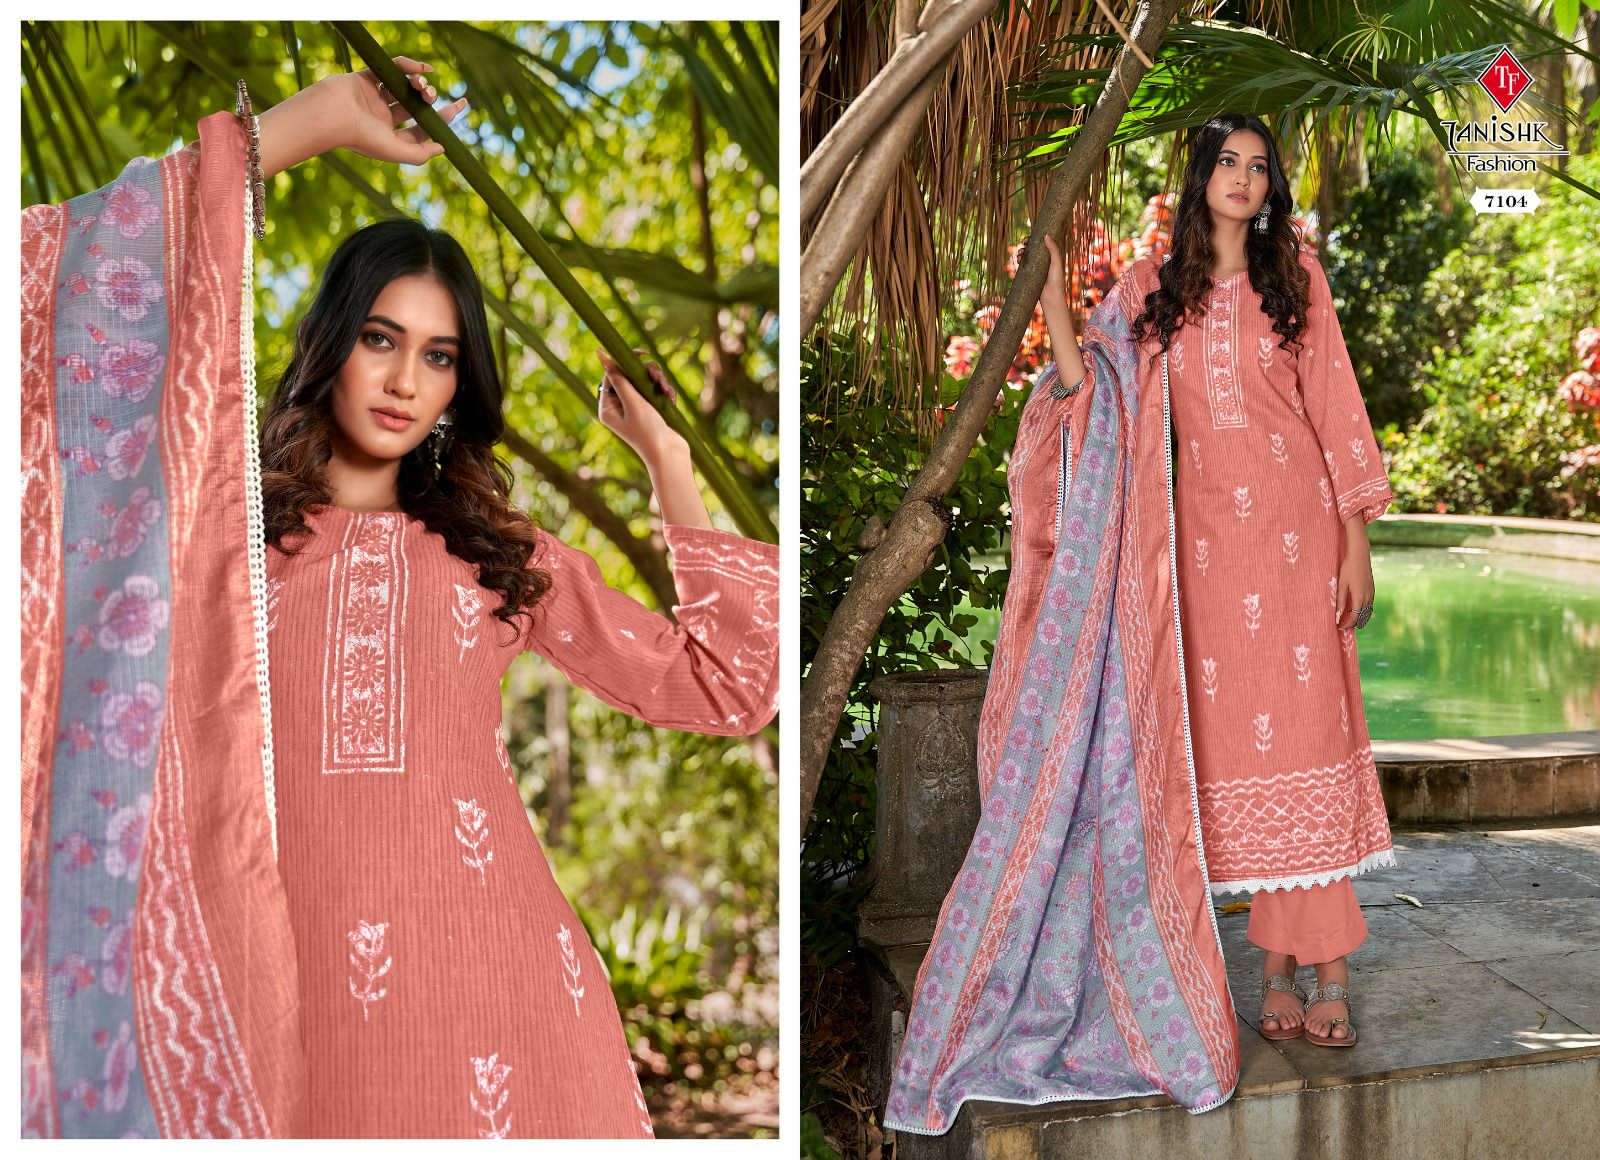 Sanah The Beauty By Tanishk Fashion 7101 To 7108 Series Beautiful Stylish Festive Suits Fancy Colorful Casual Wear & Ethnic Wear & Ready To Wear Pure Cotton Print Dresses At Wholesale Price